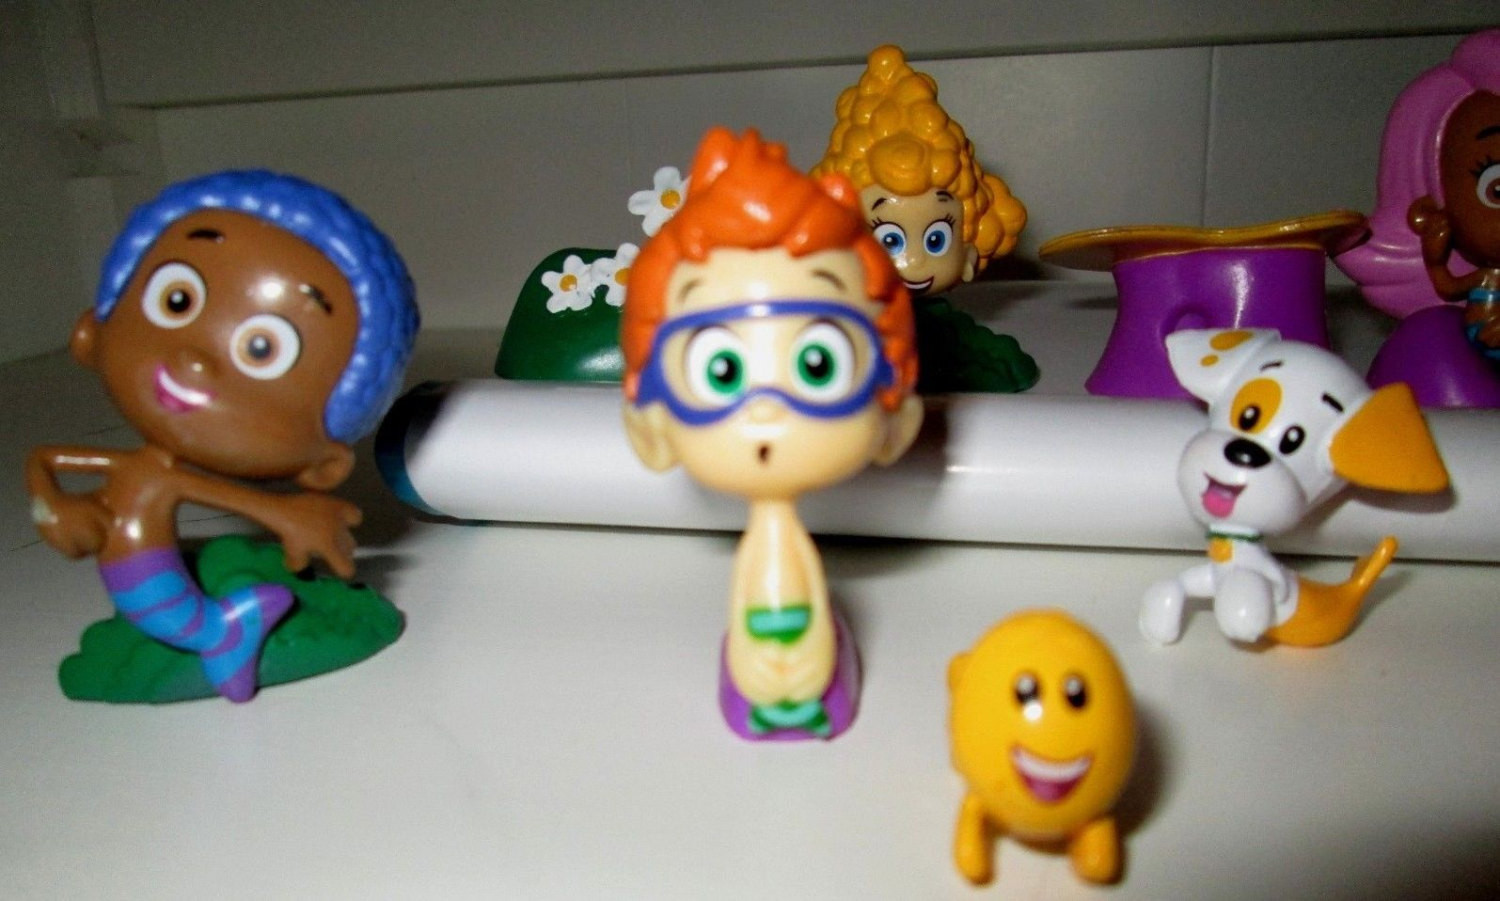 Bubble Guppies Birthday Cake Toppers
 New Bubble Guppies Cake Toppers PVC Figures Lot Birthday Party